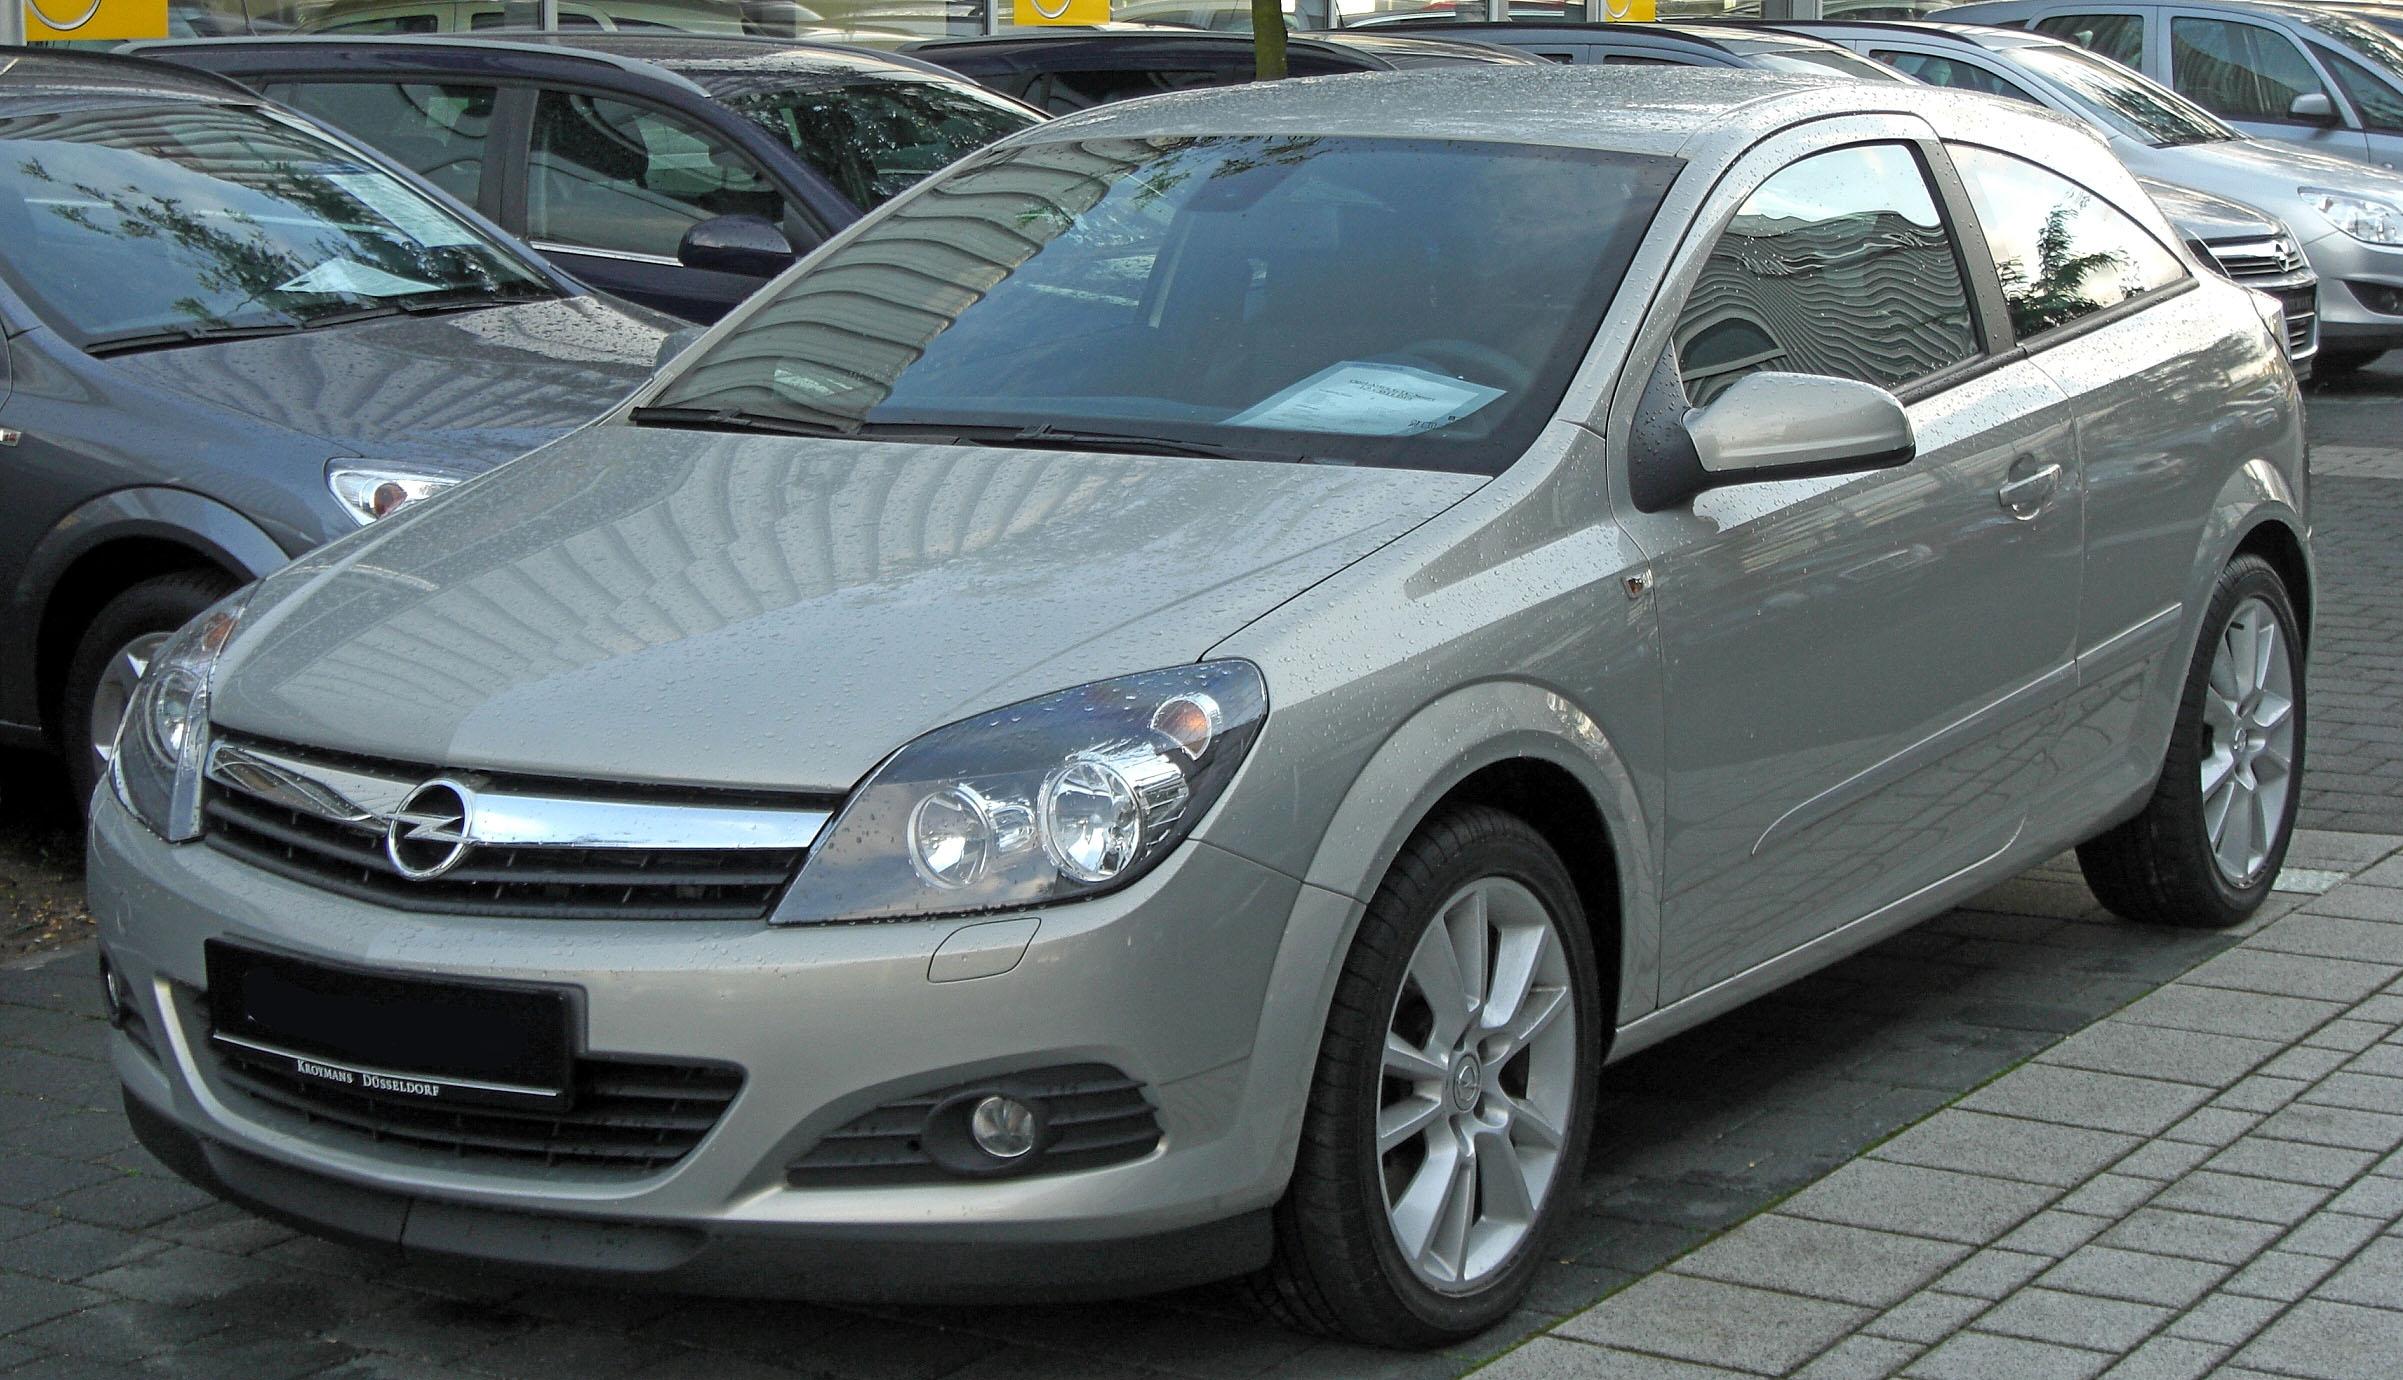 File:Opel Astra H front.jpg - Wikimedia Commons